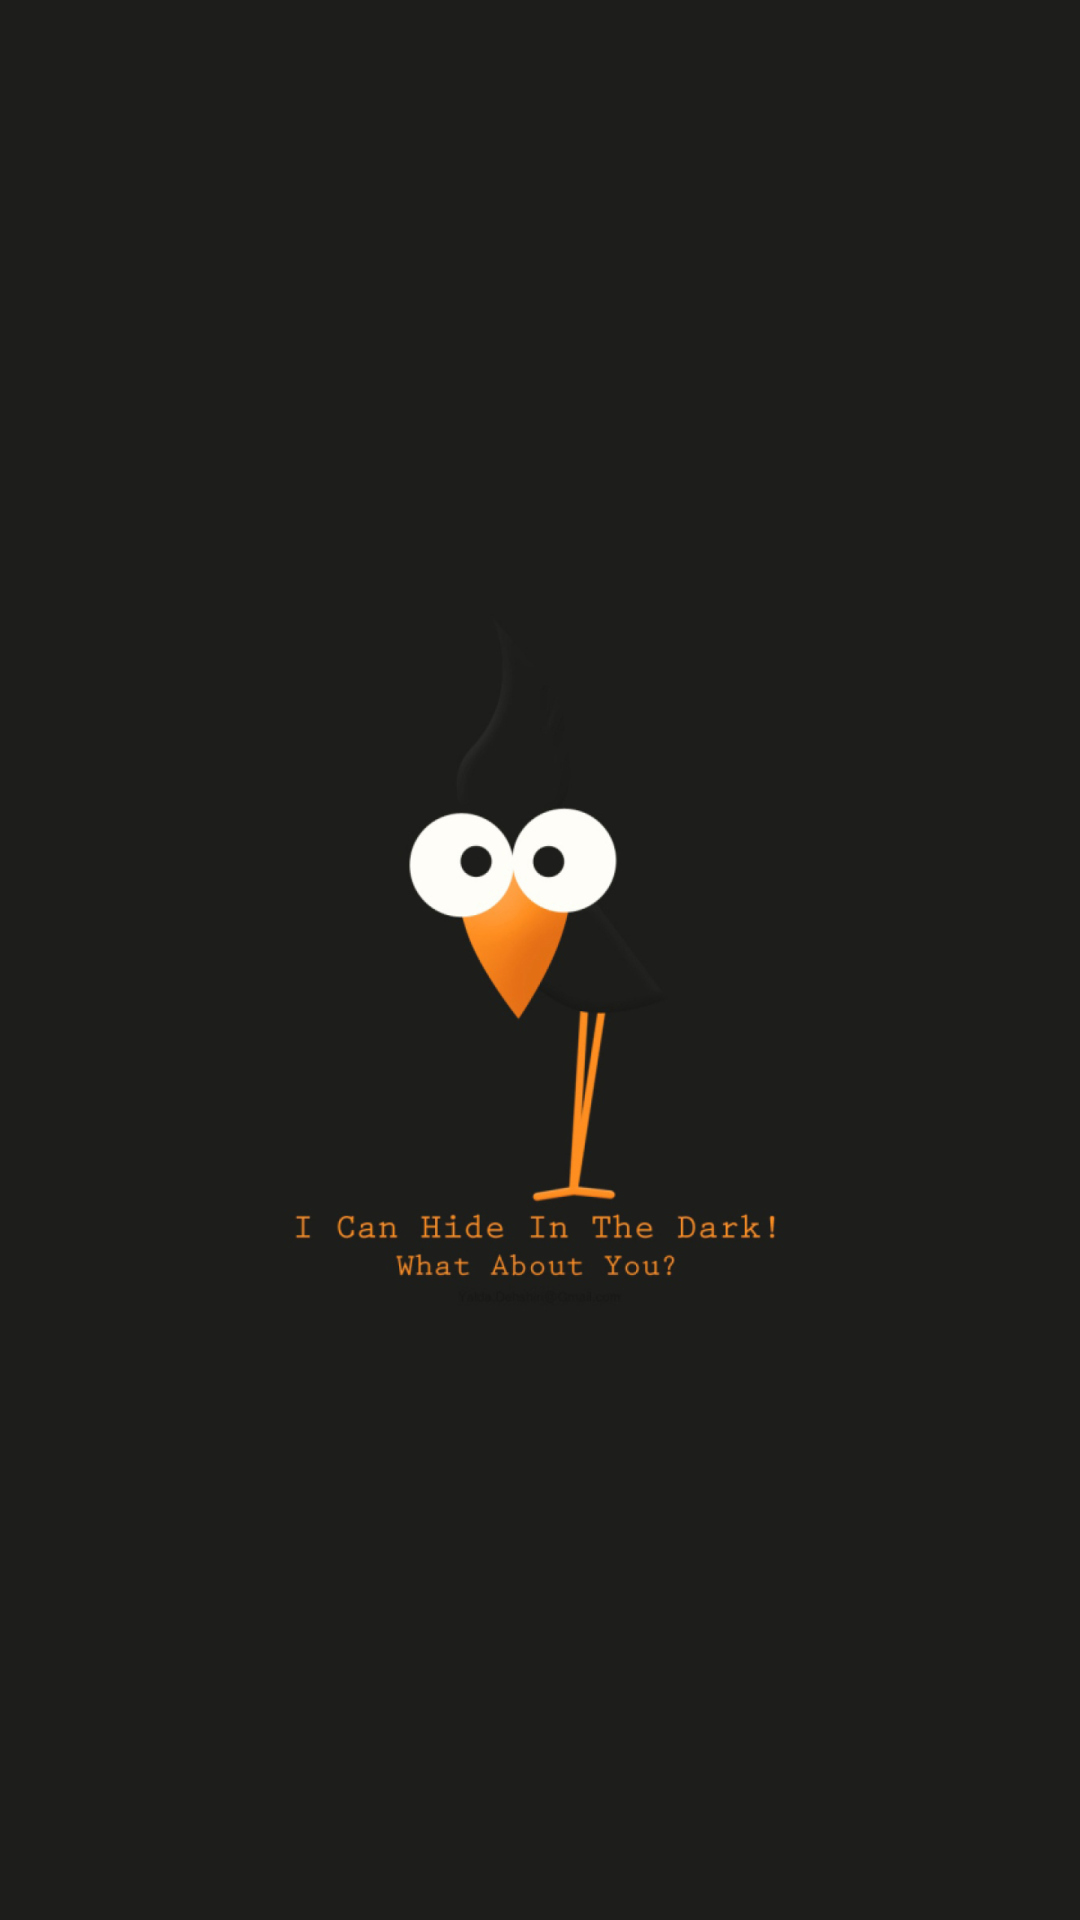 I Can Hide In The Dark wallpaper 1080x1920